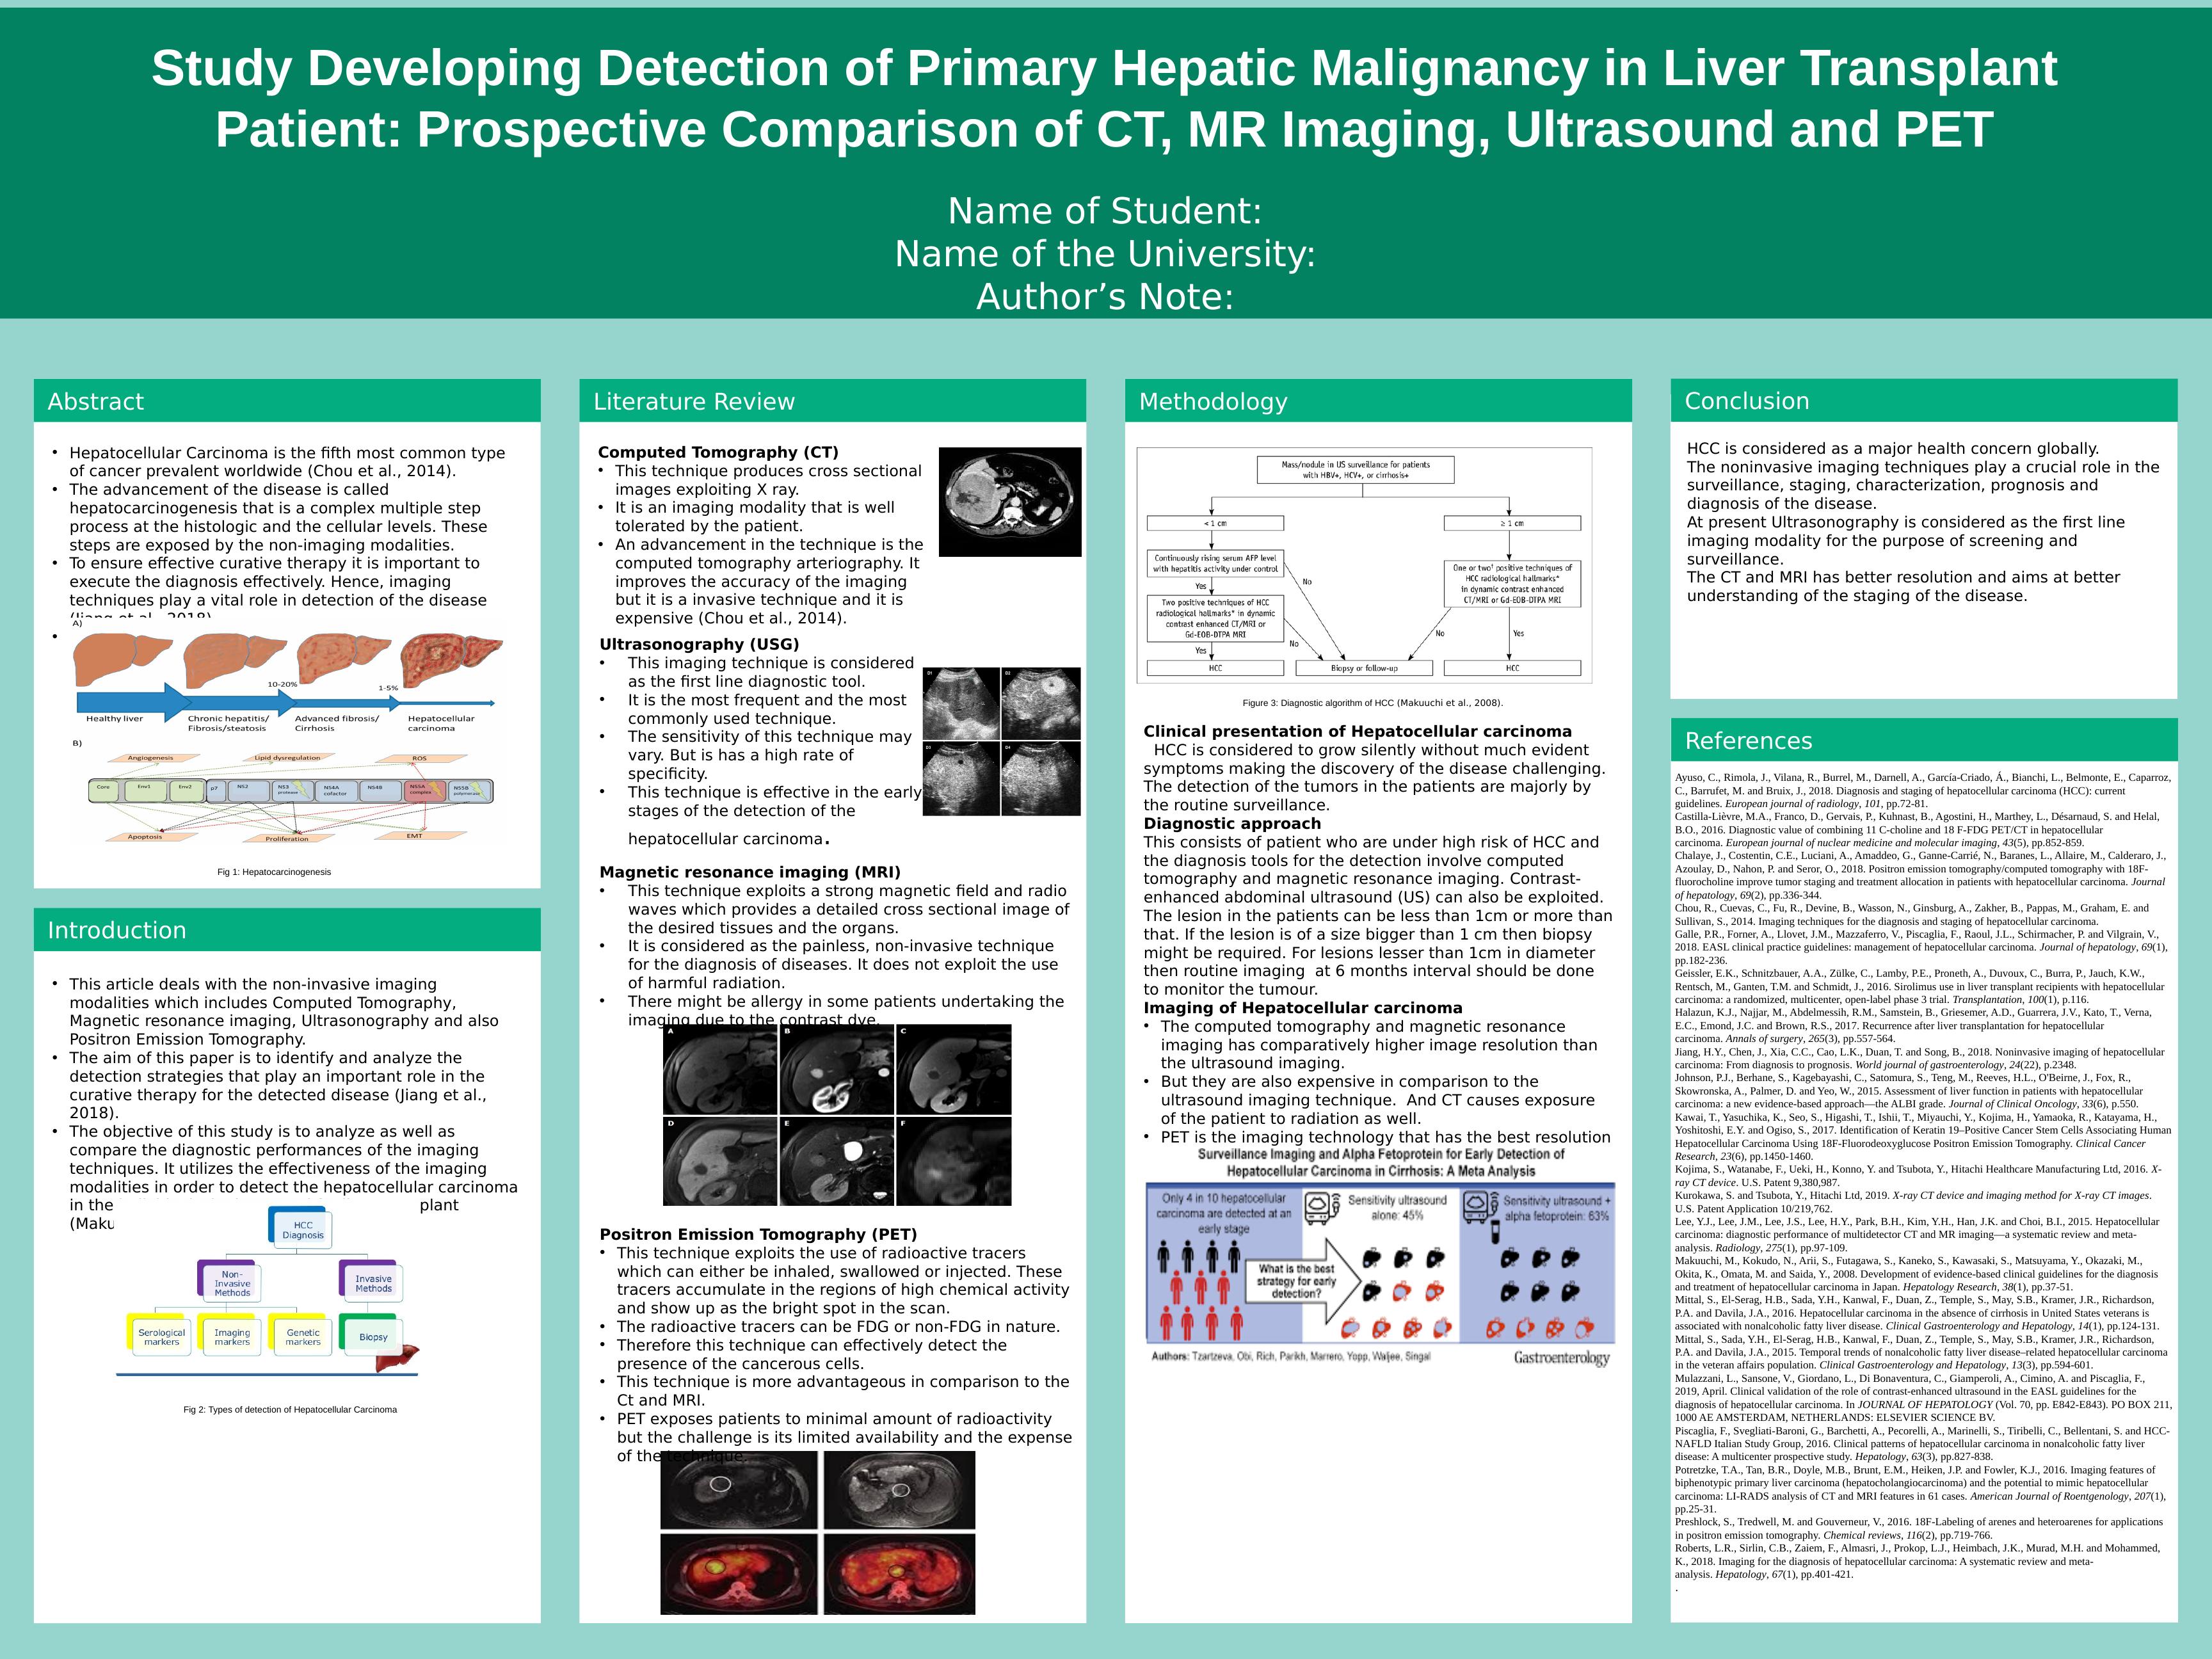 Detection of Primary Hepatic Malignancy in Liver Transplant Patient: Comparison of CT, MR Imaging, Ultrasound and PET_1